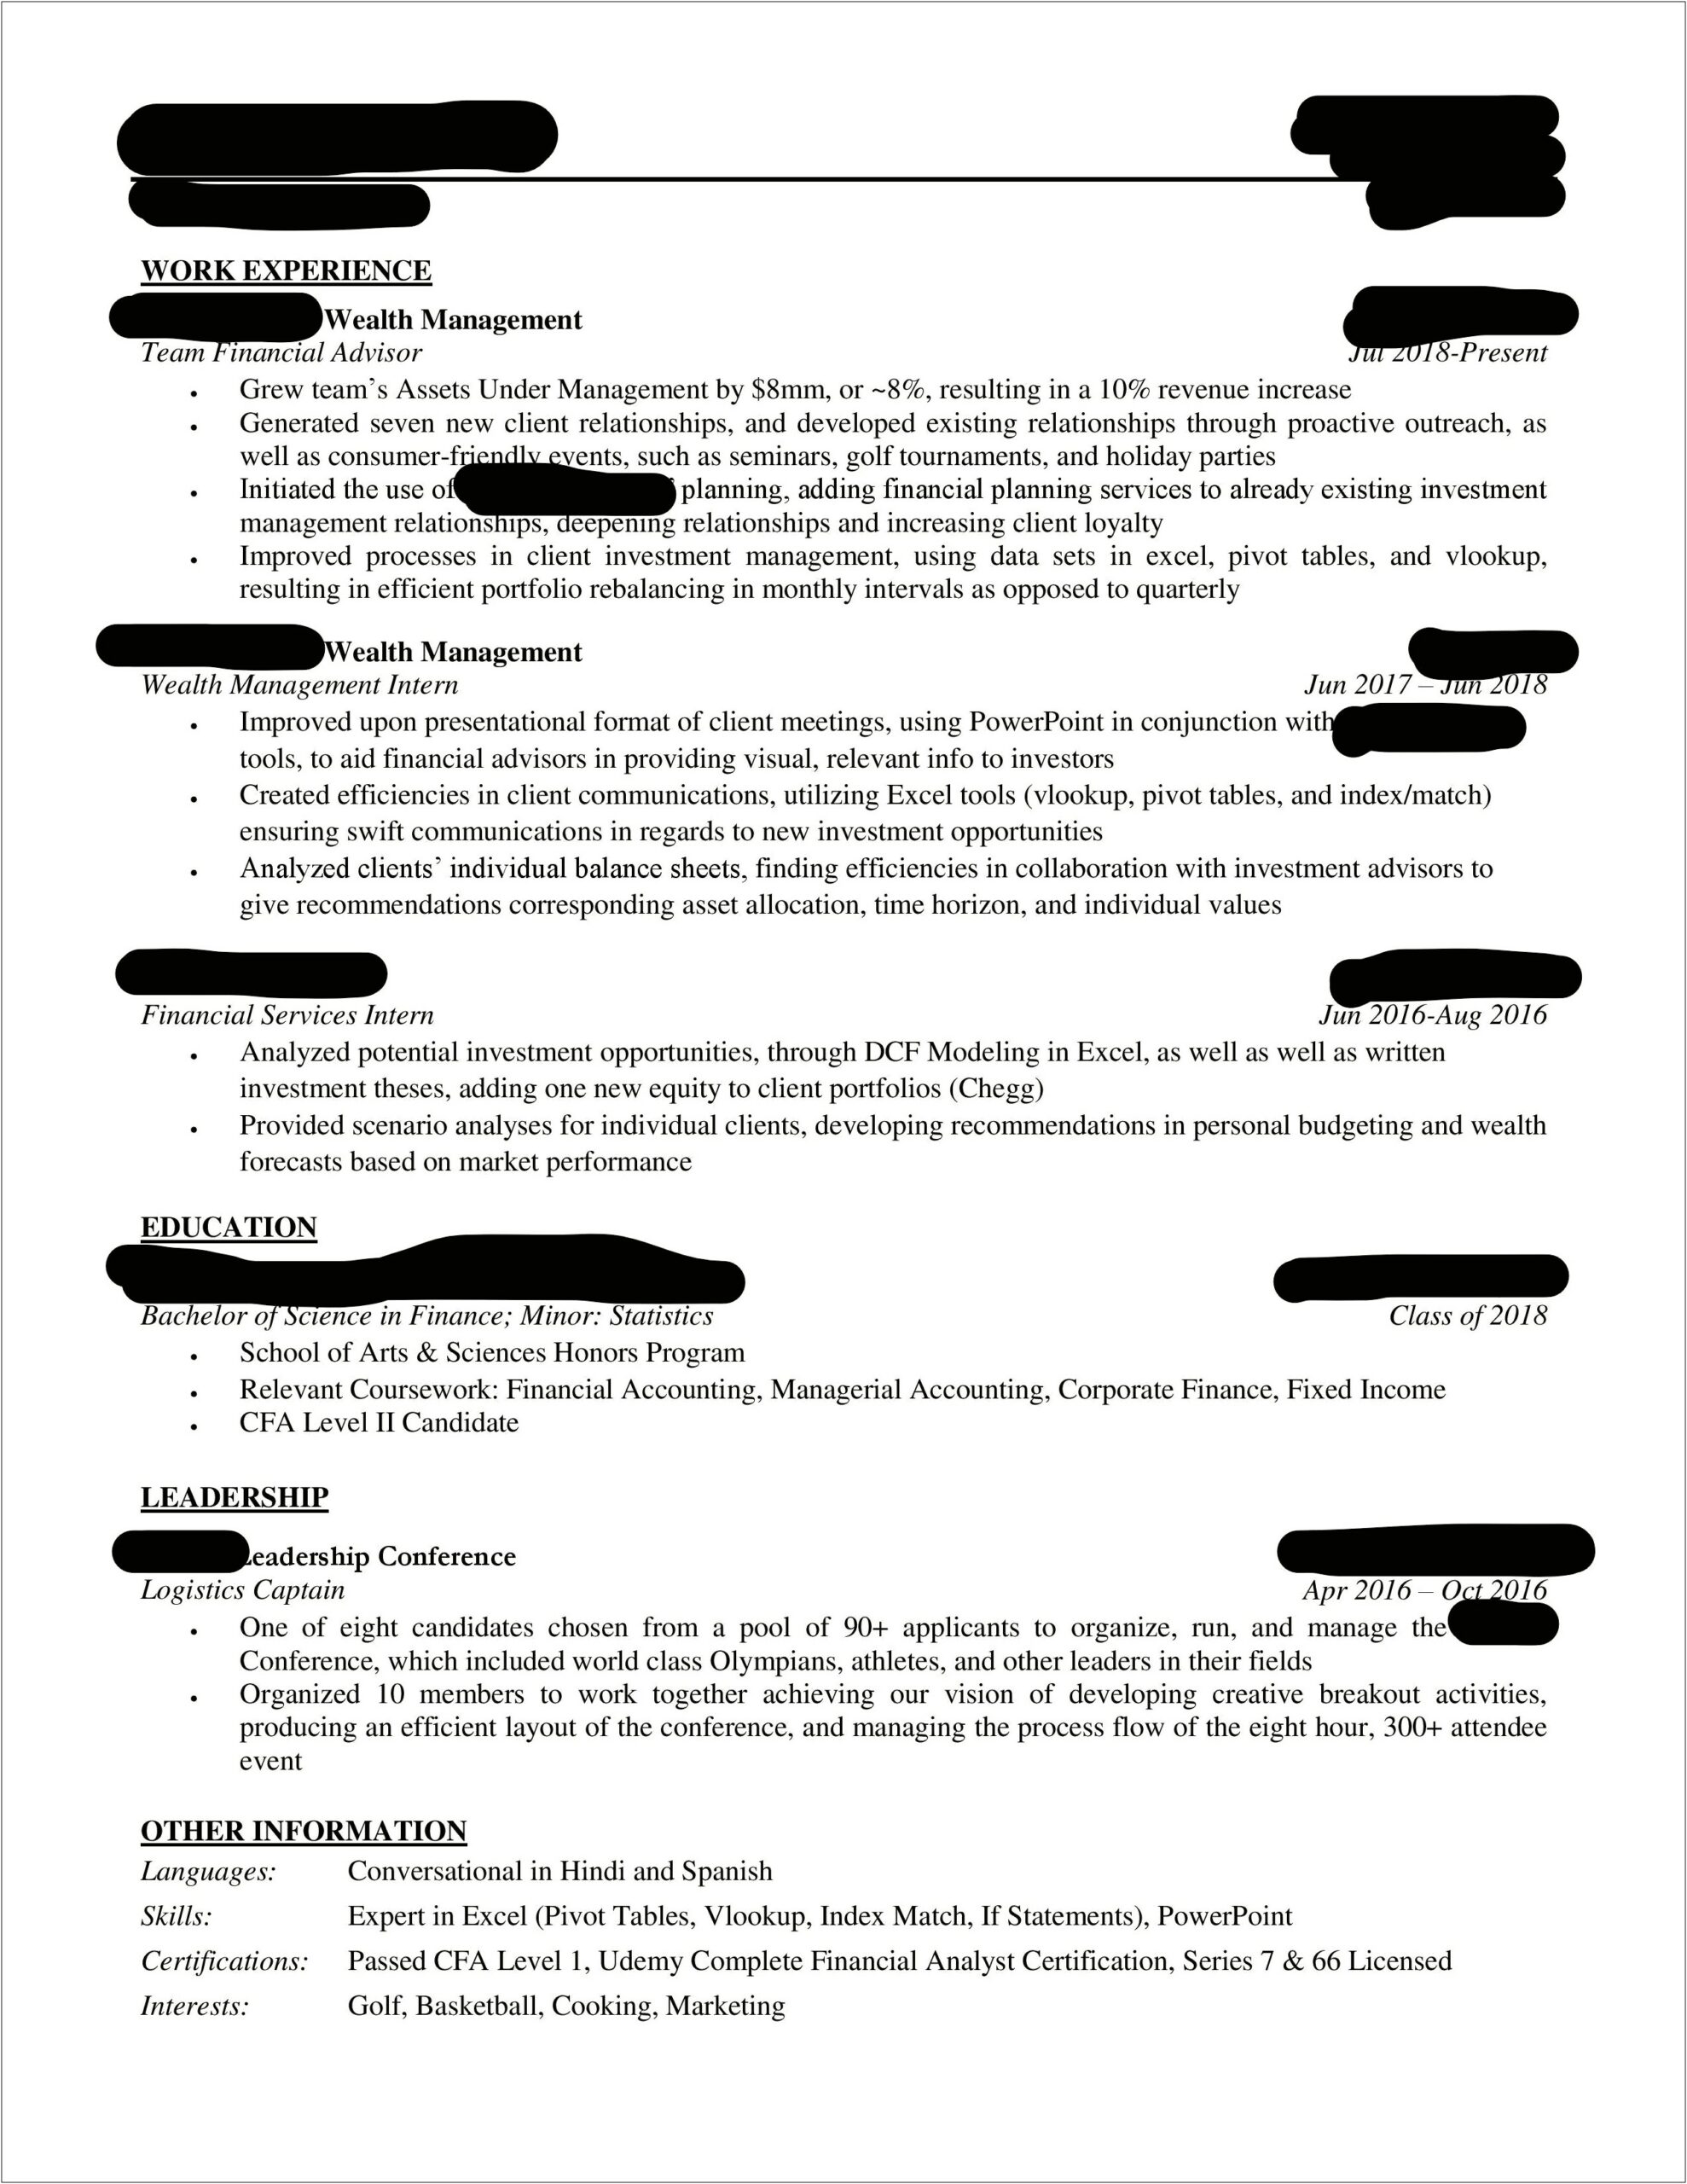 Should You Put Relevant Conference On Resume